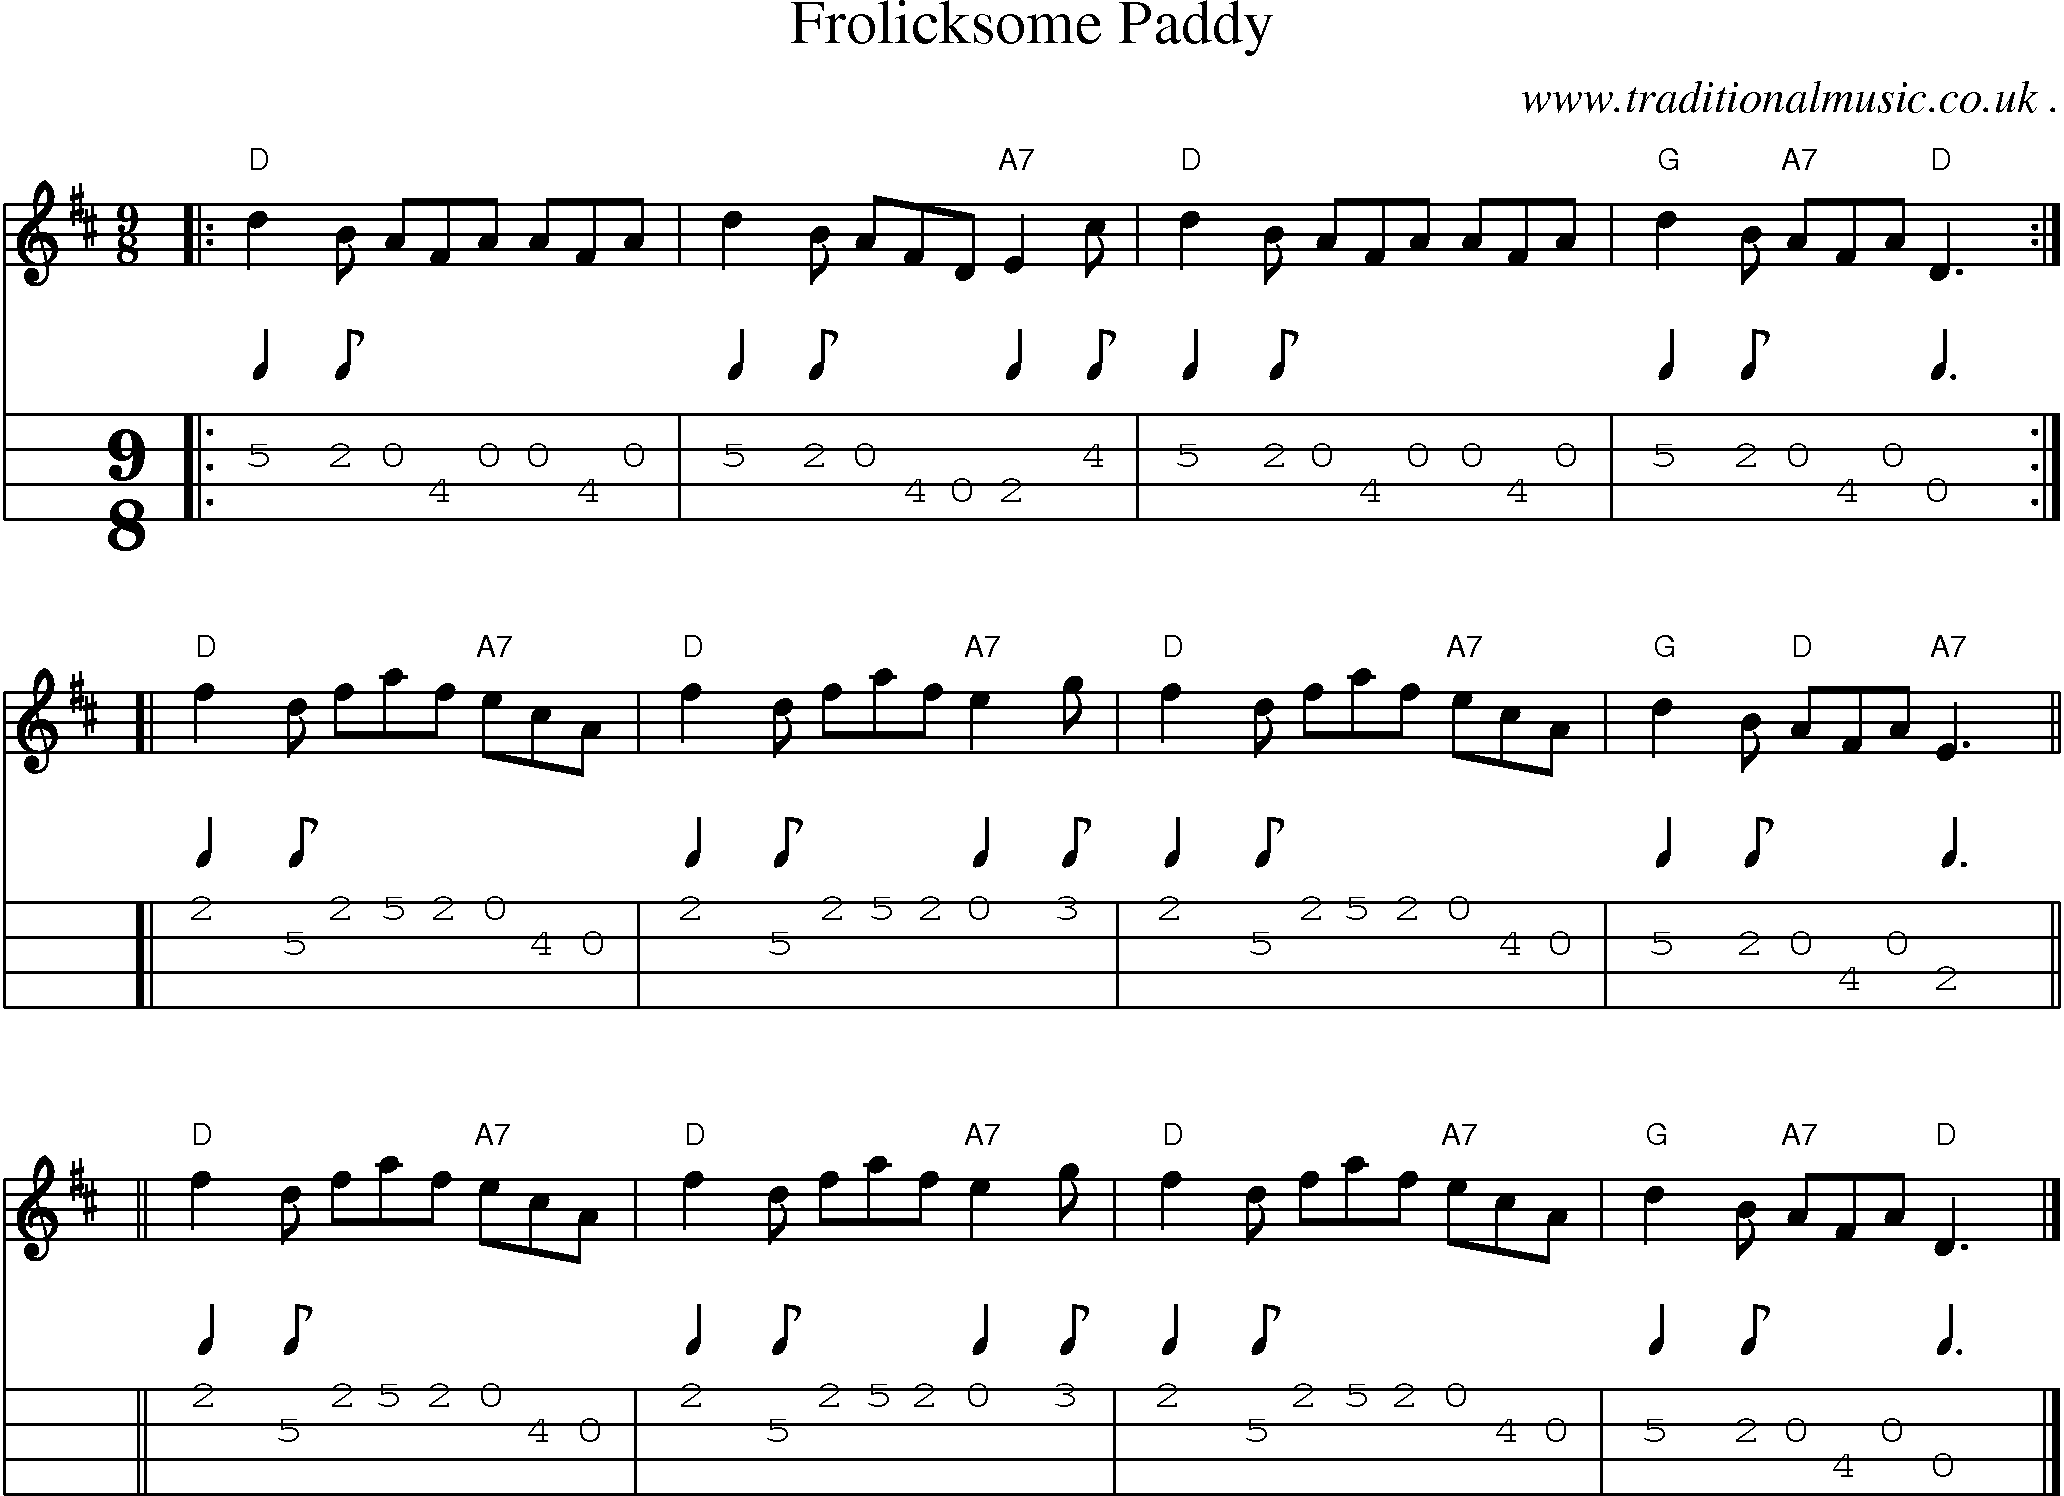 Sheet-music  score, Chords and Mandolin Tabs for Frolicksome Paddy